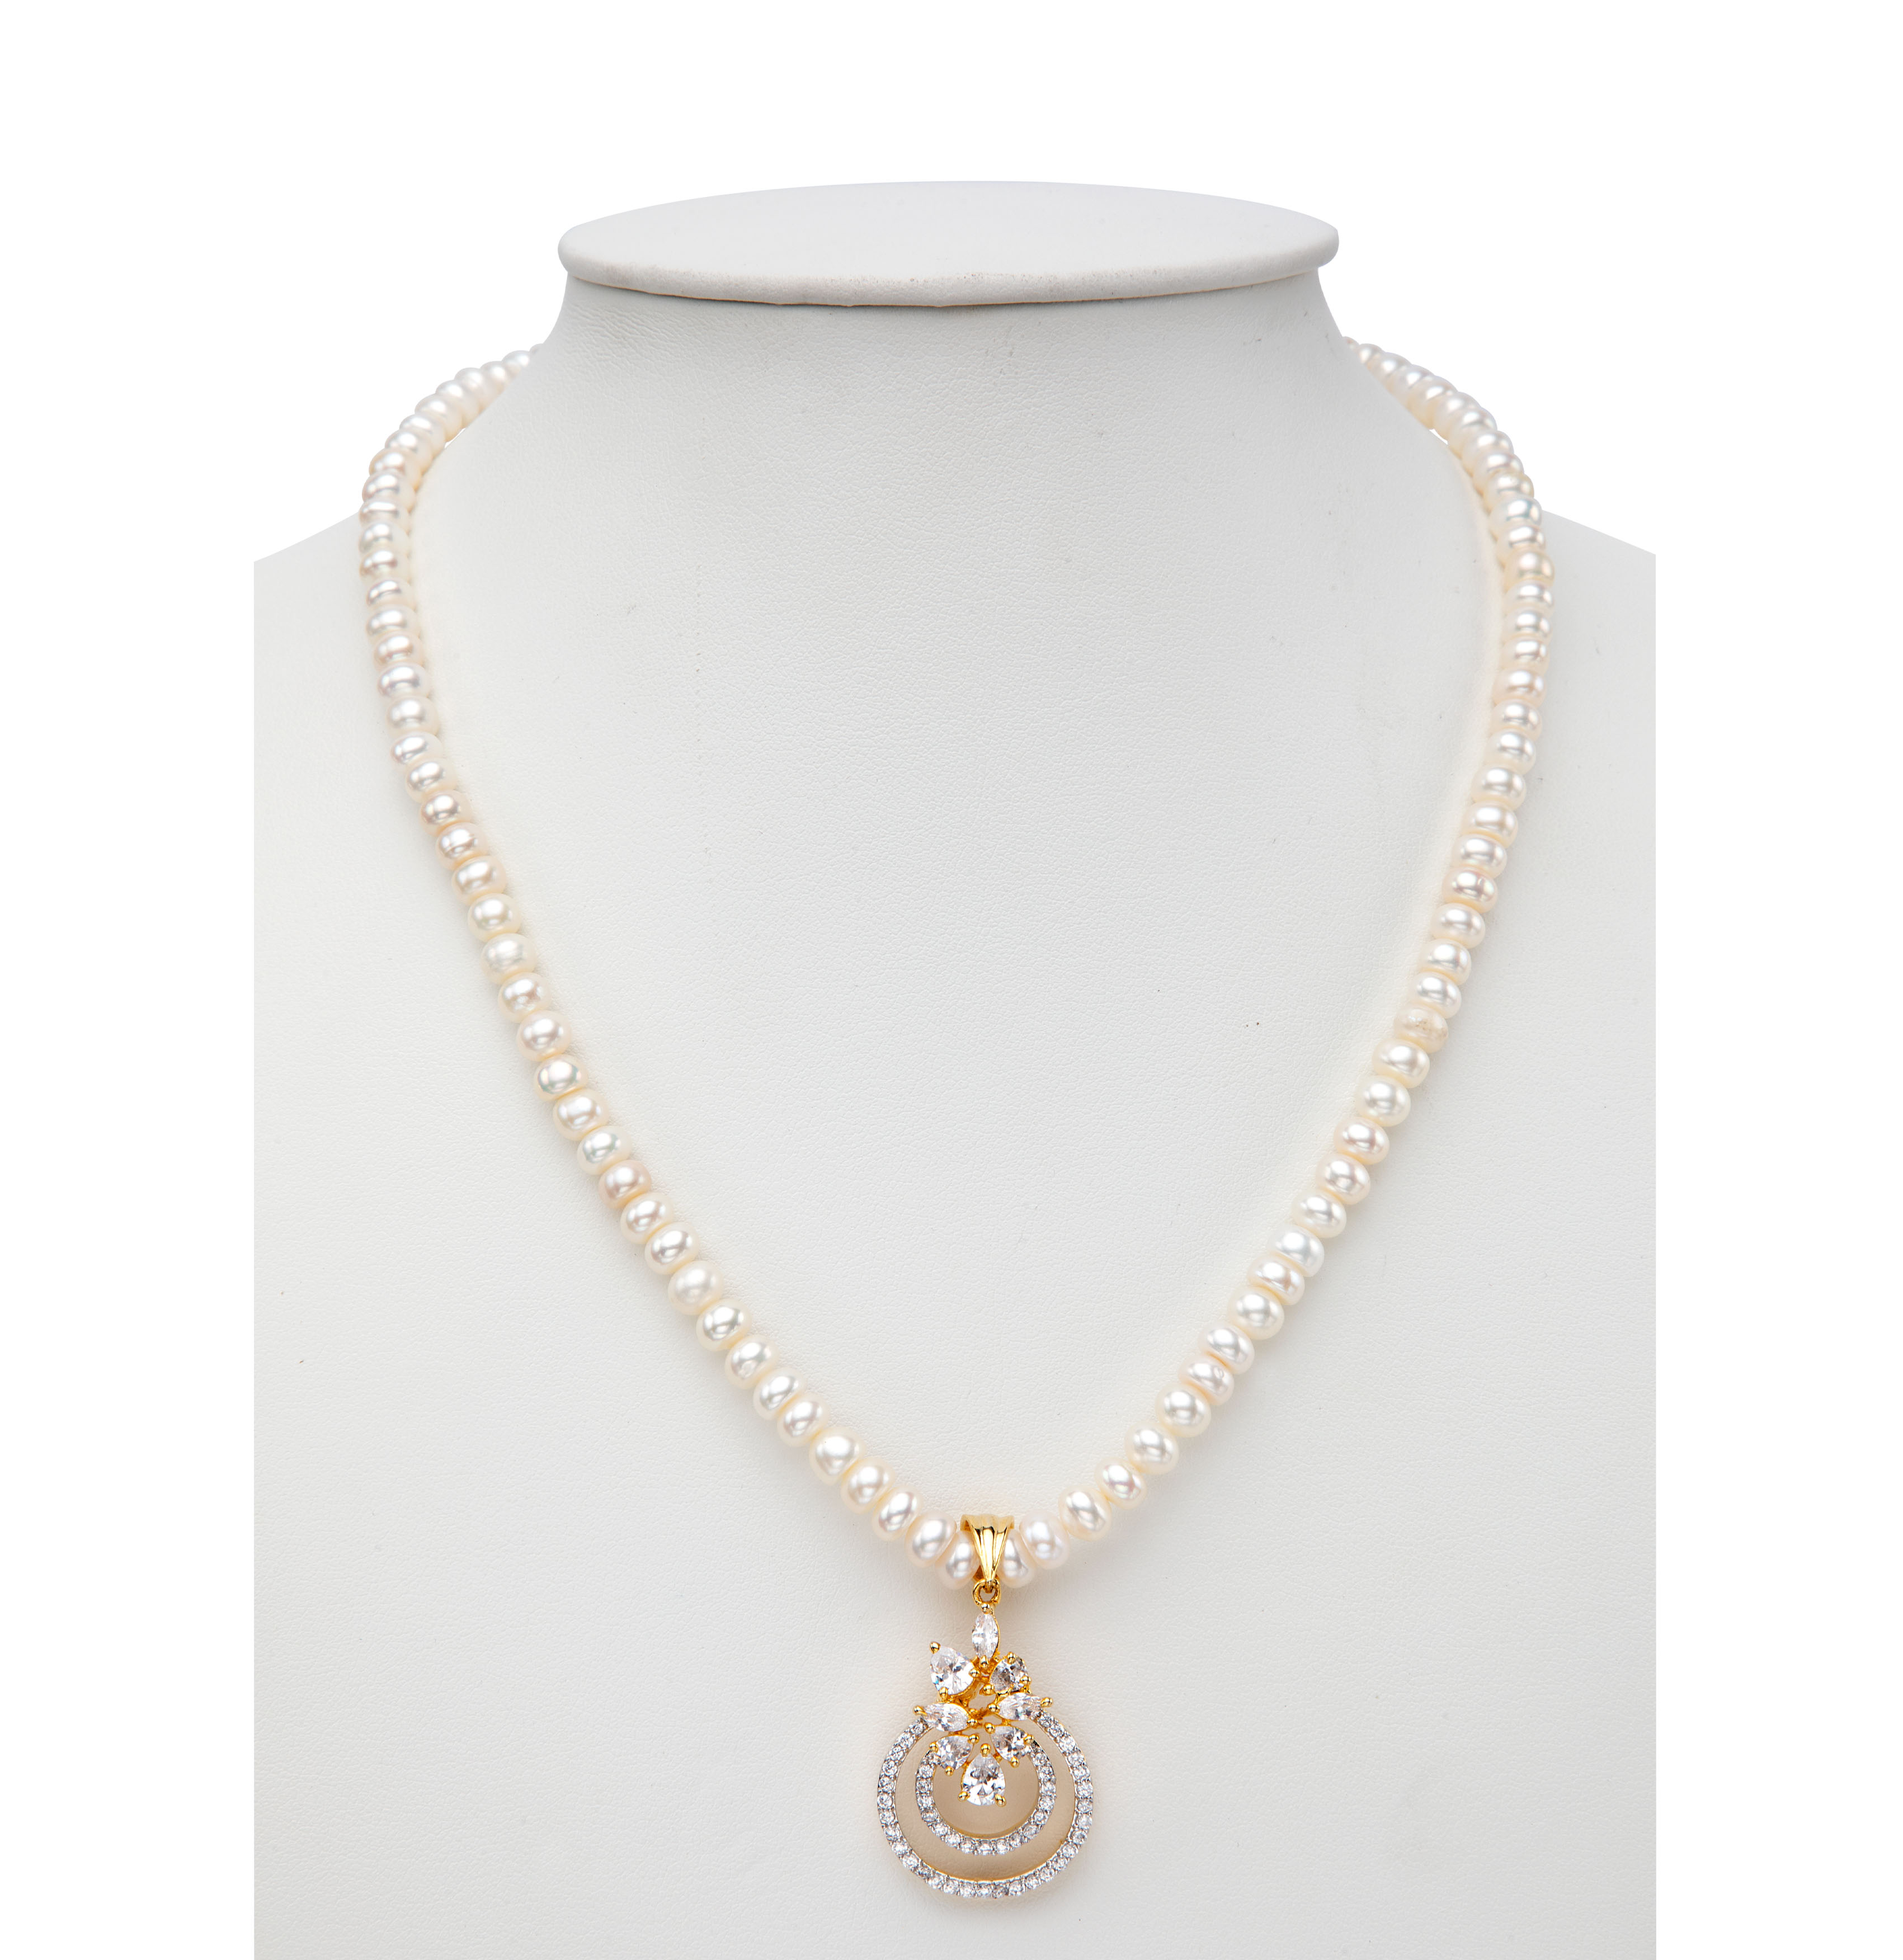 Attractive Pearl Necklace and Earring Set | Mangatrai Pearls & Jewellers